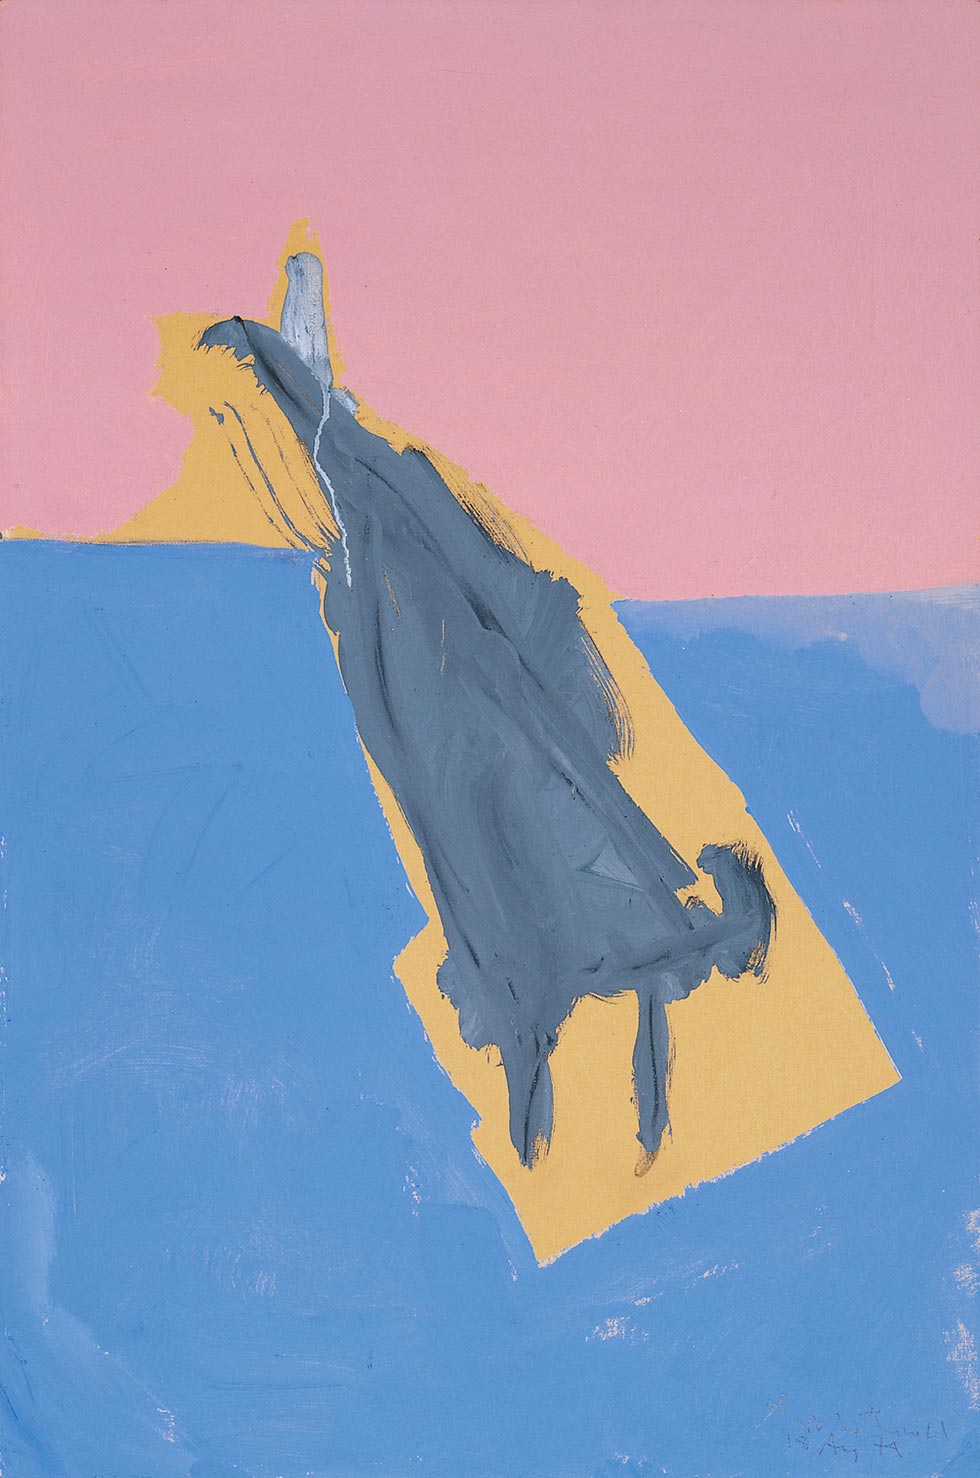 An abstract painting with a central gray form on a blue and pink background